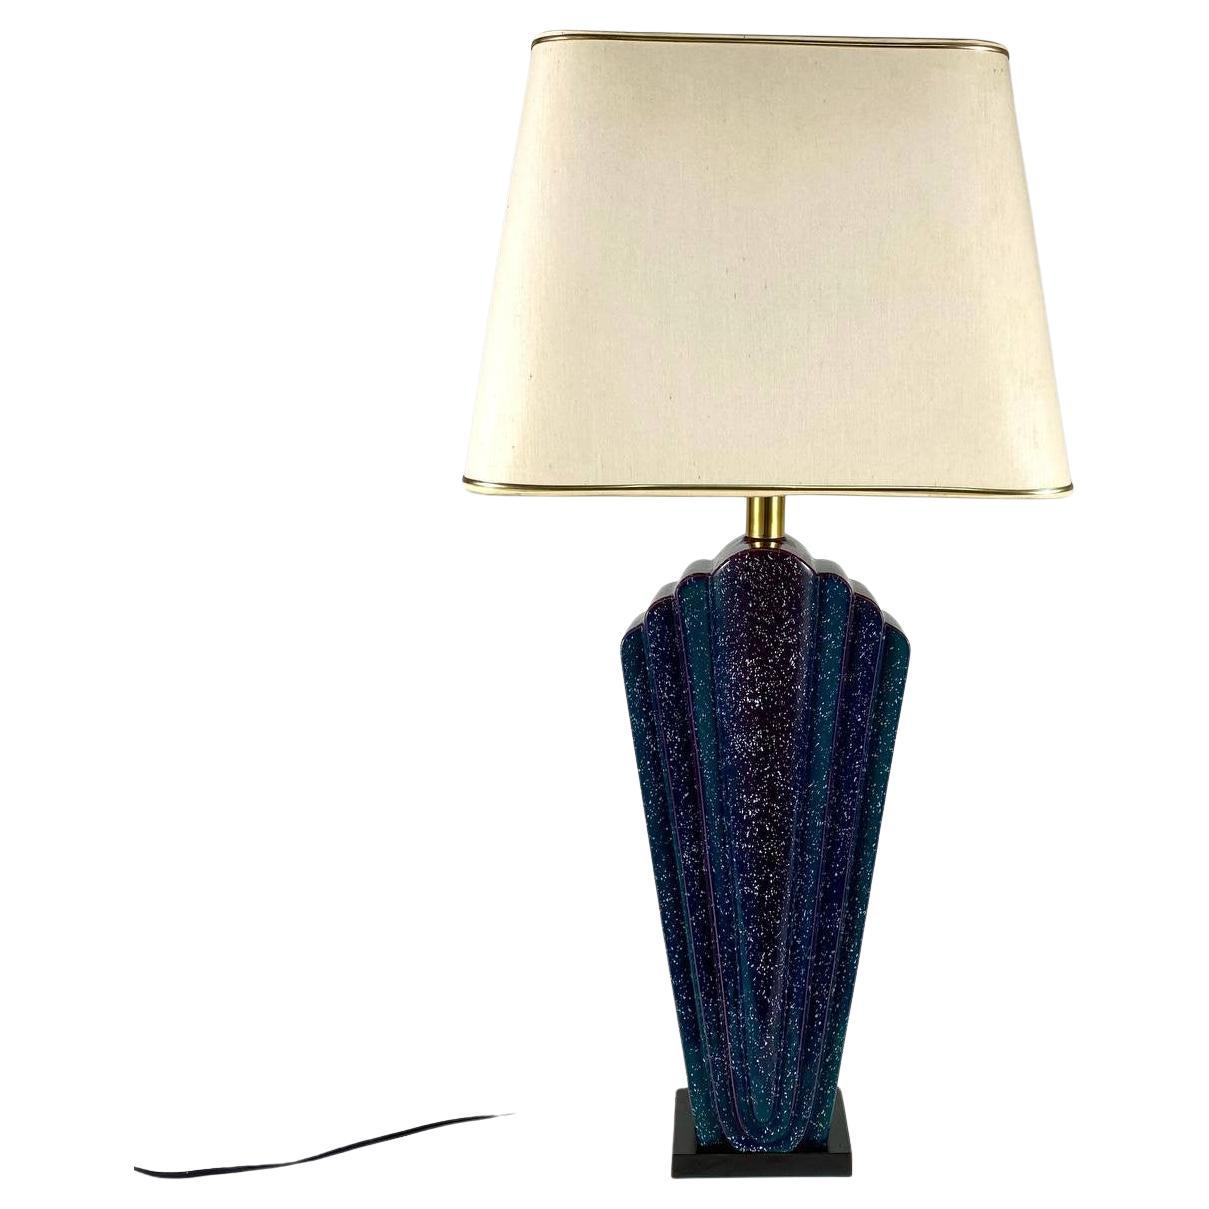 Large Italian Table Lamp 1960s Mid-Century Modern Blue Glass Lamp For Sale